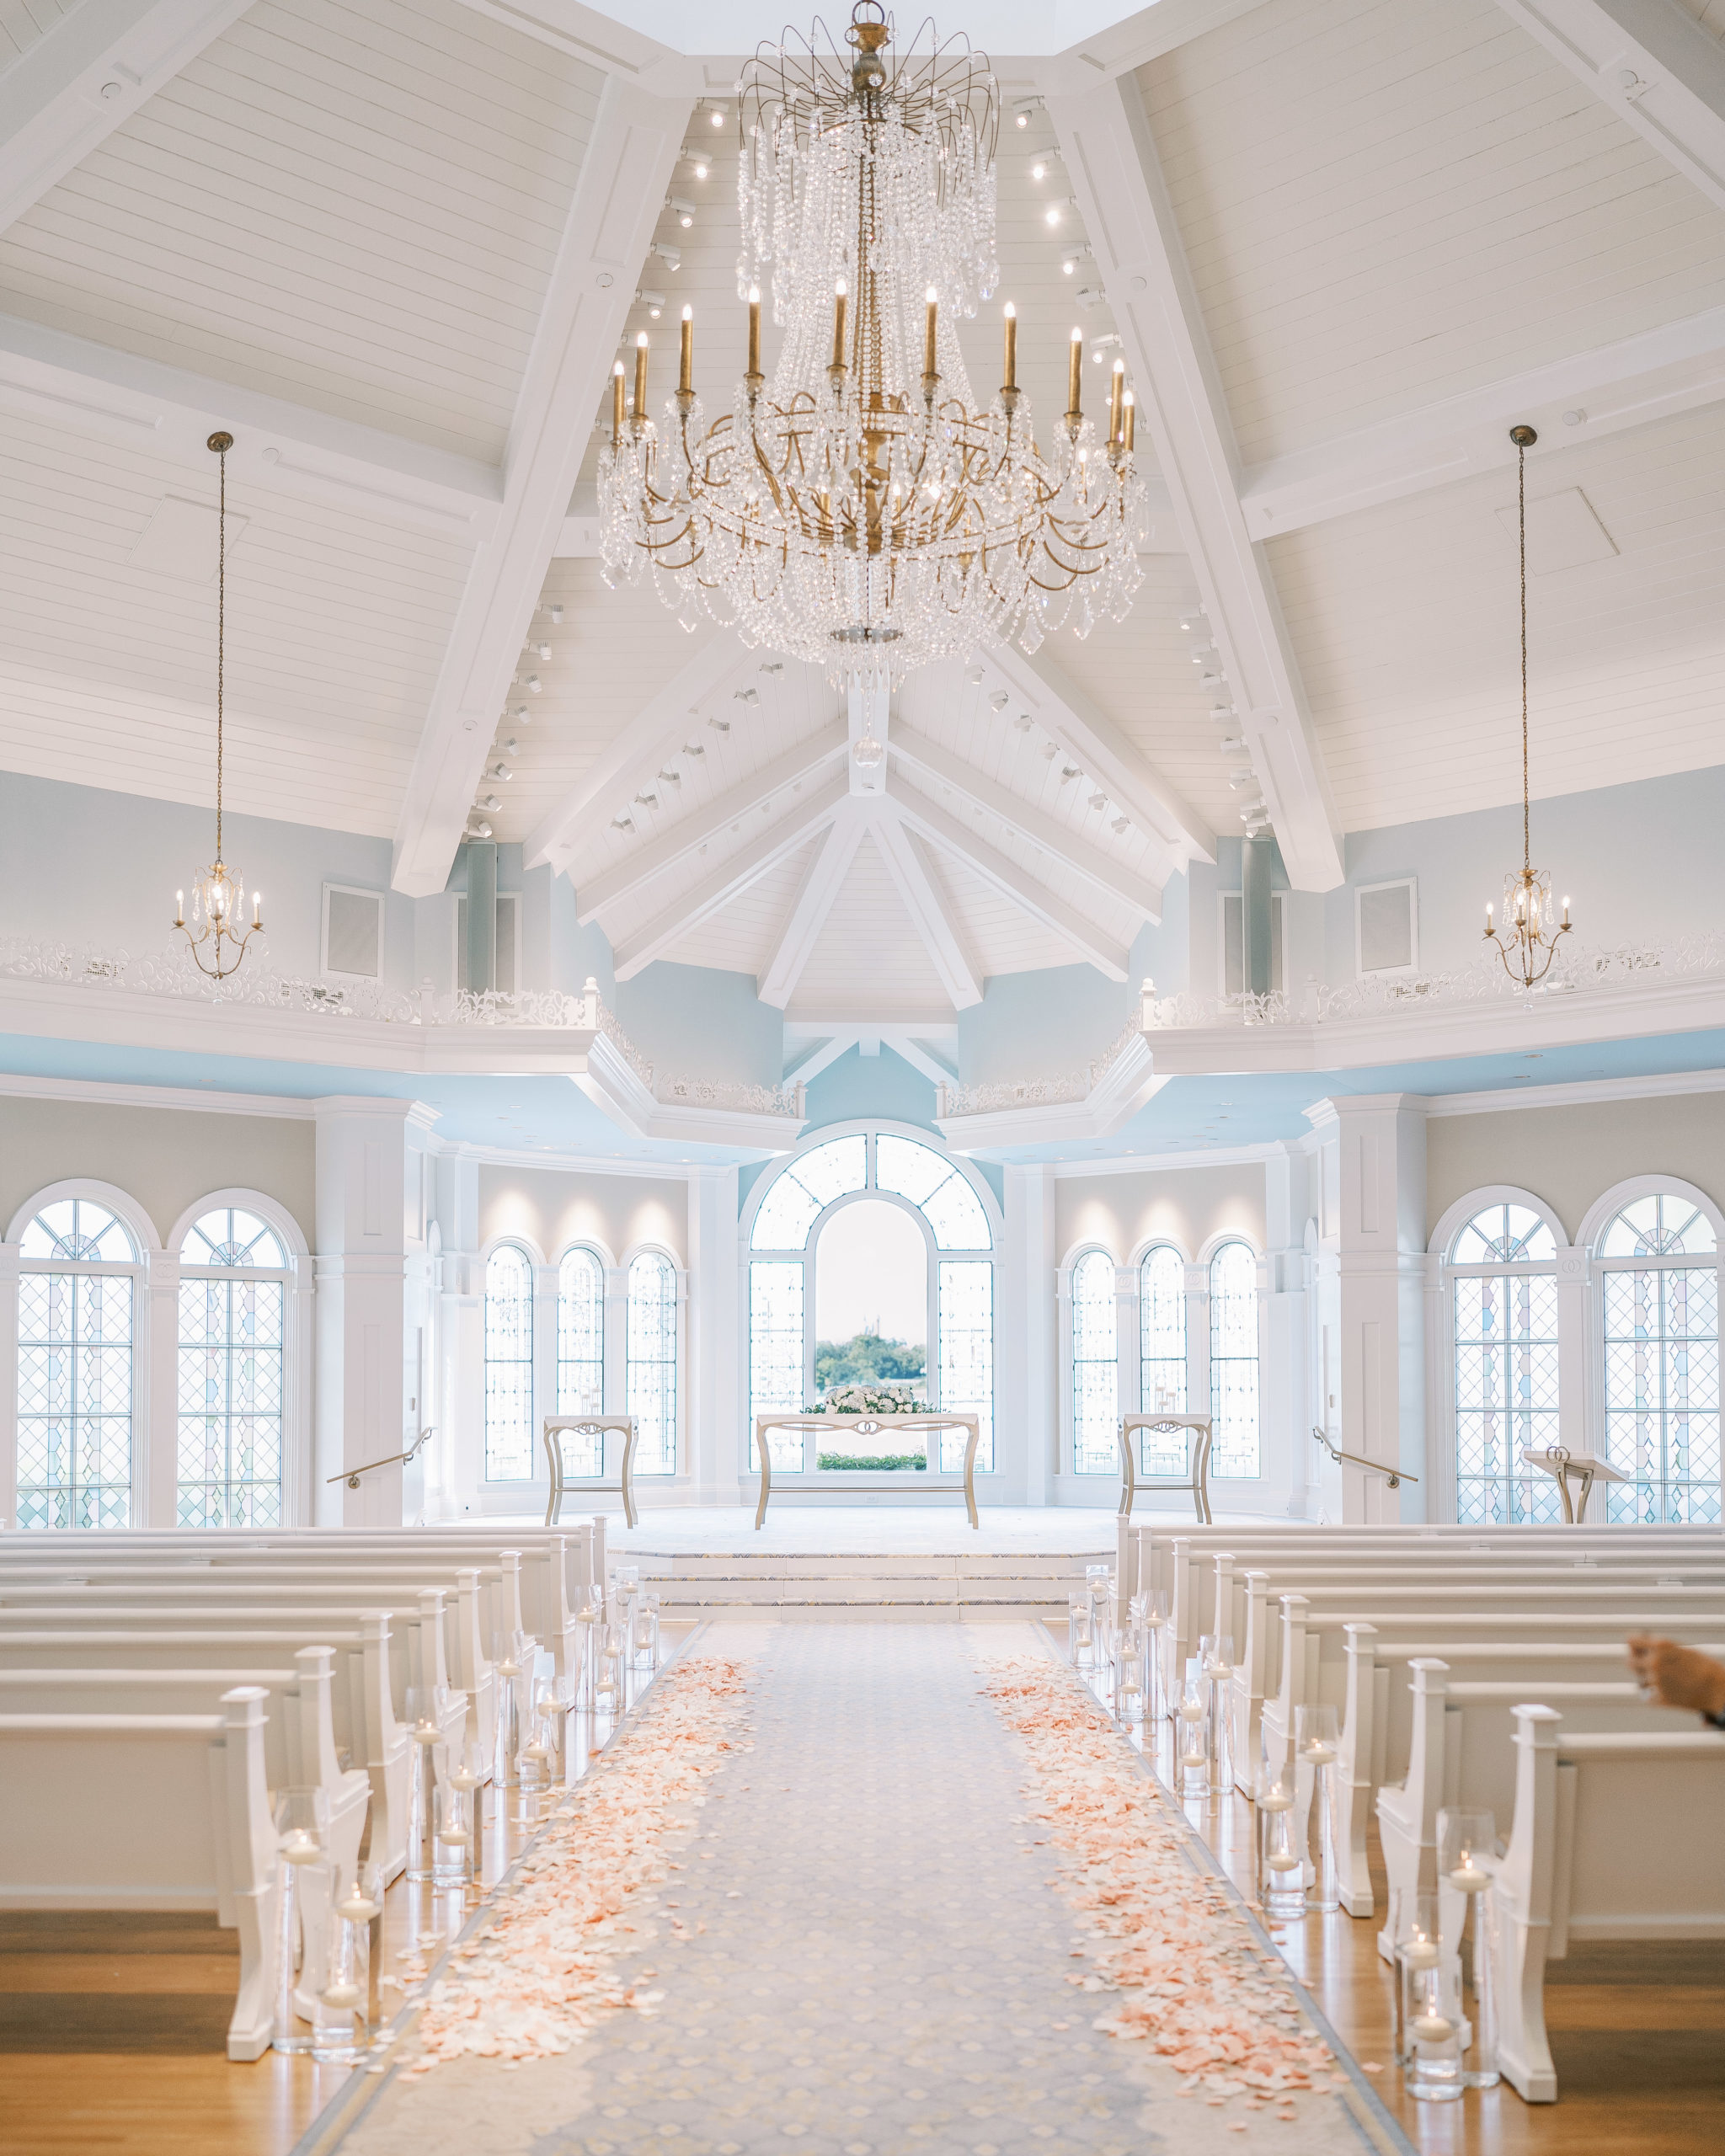 Light blue and white wedding ceremony with chandelier and white pews with pink and white petals lining seats 